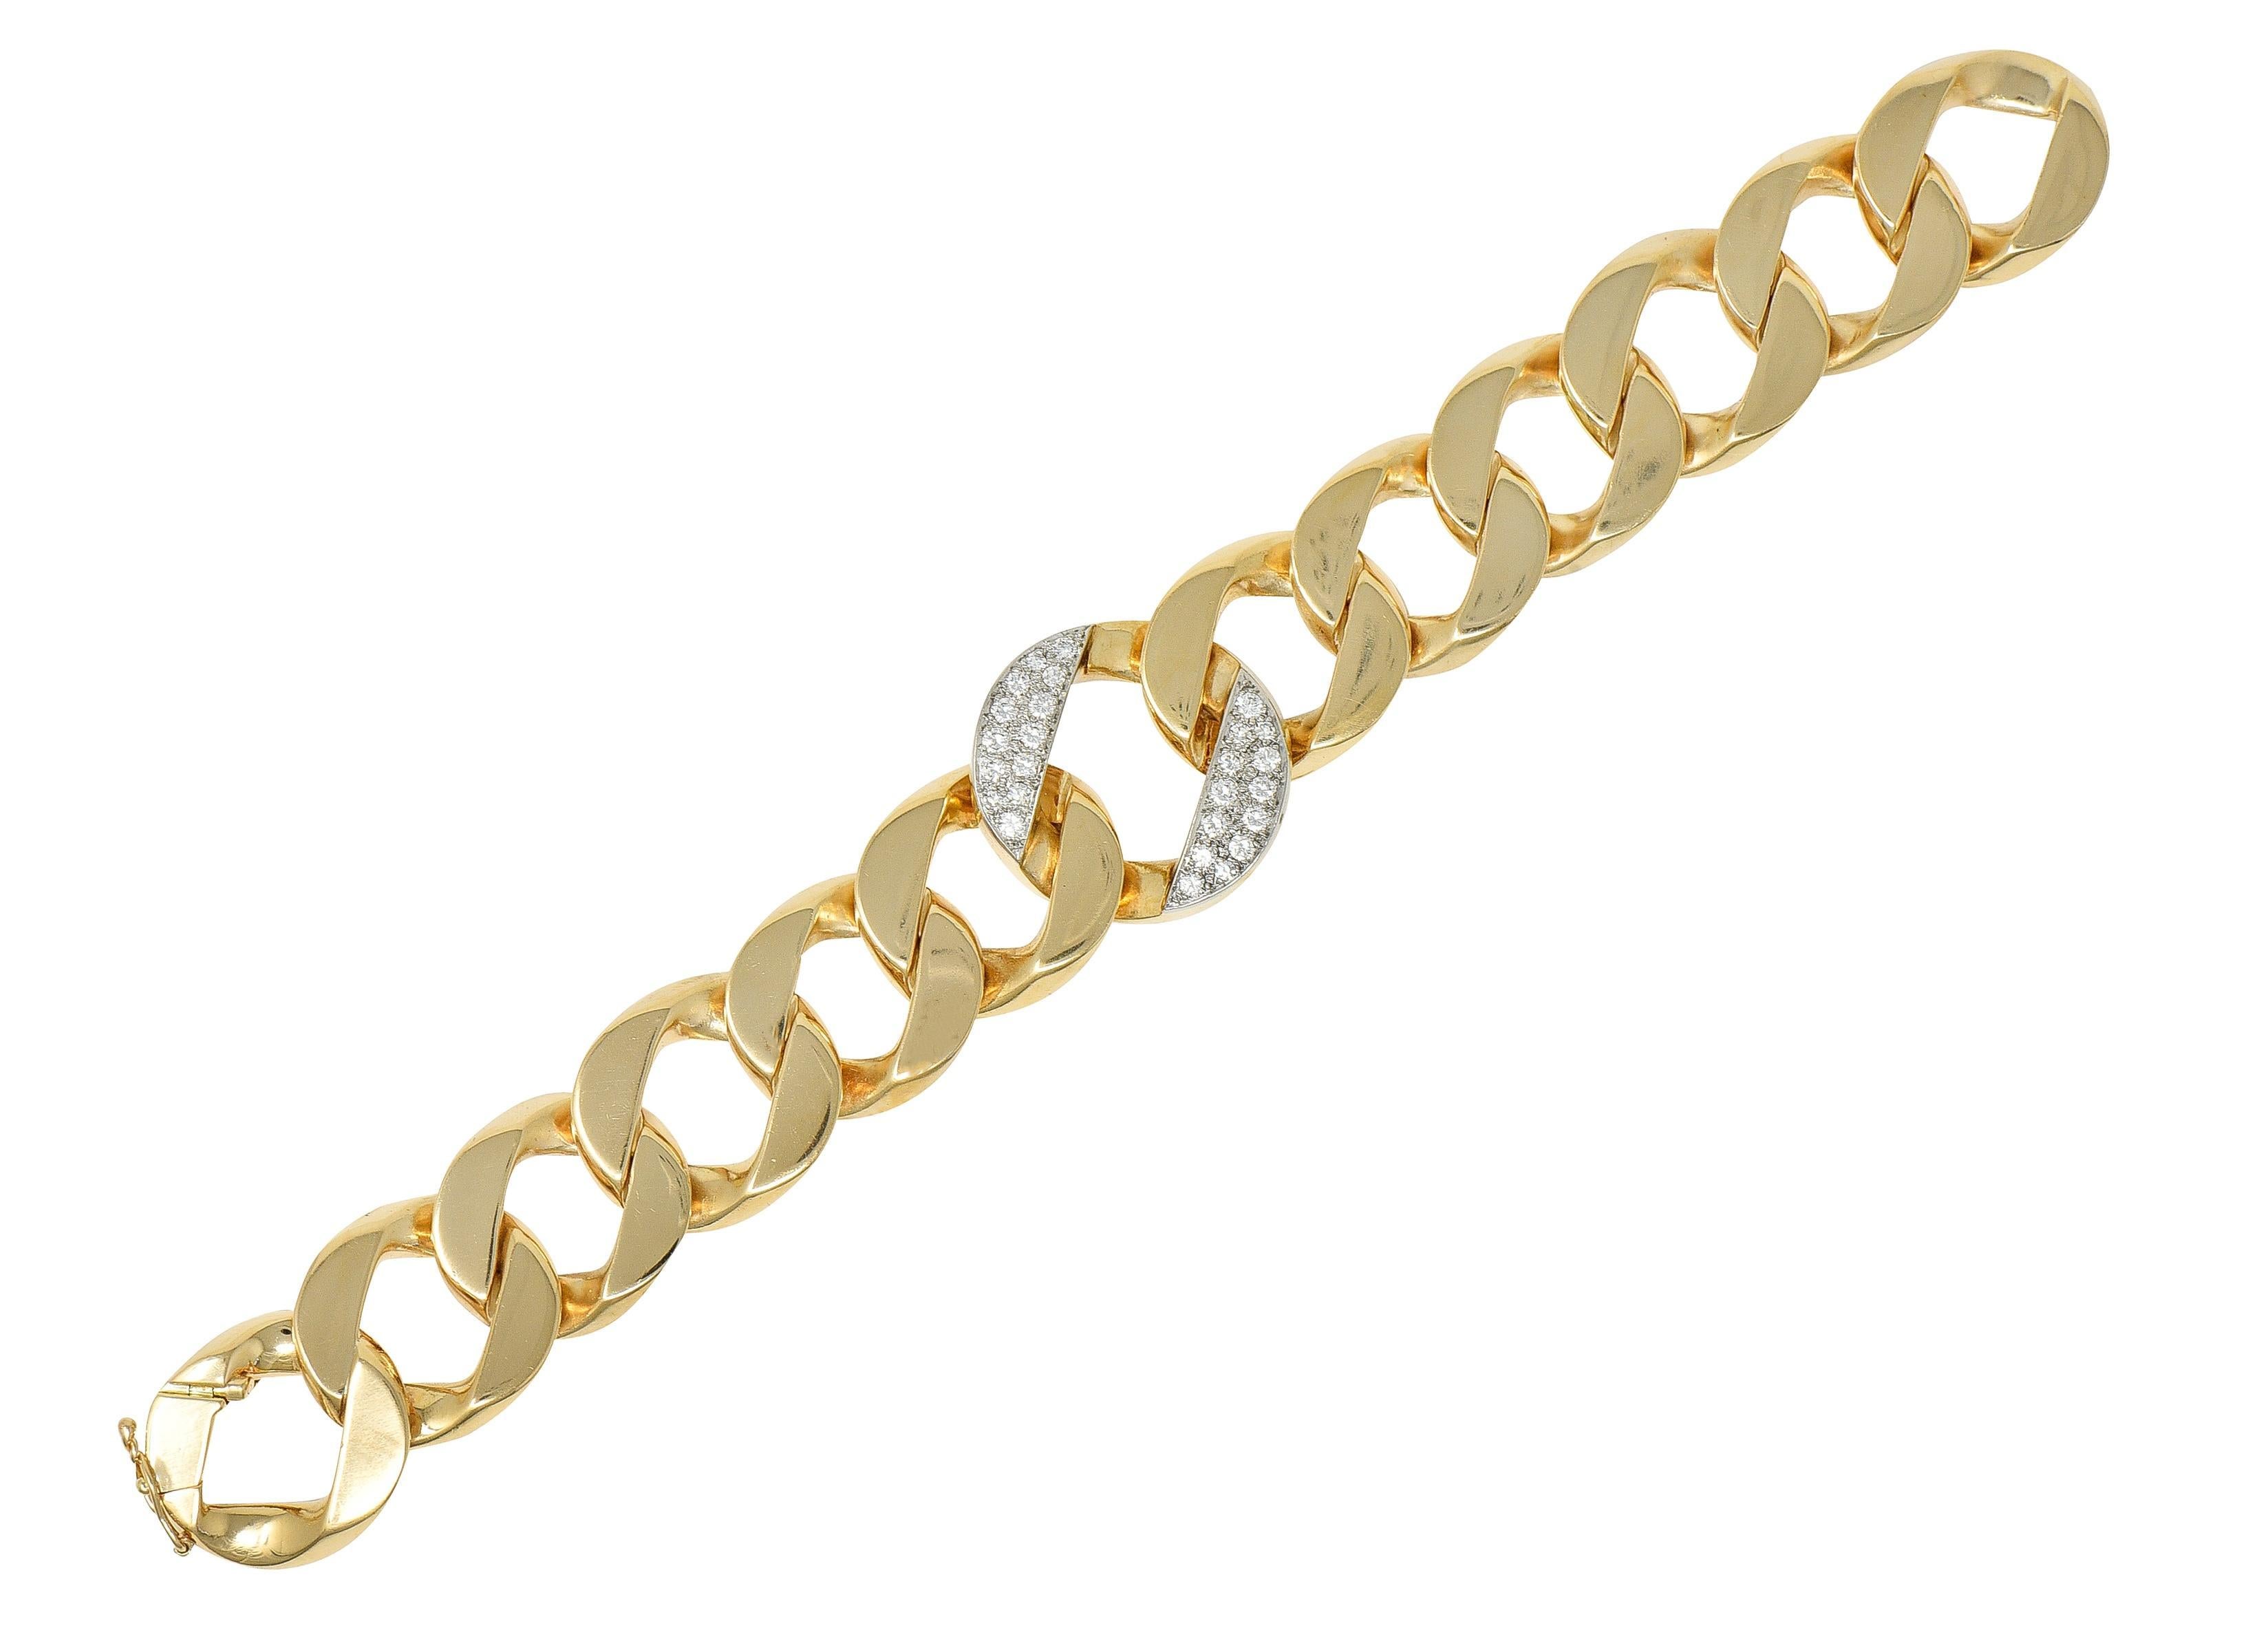 Designed as a large curb link chain bracelet centering one larger link
Platinum-topped and pavé set with single and round brilliant cut diamonds 
Weighing approximately 1.20 carats total - G color with VS1 clarity
With high polish finish and